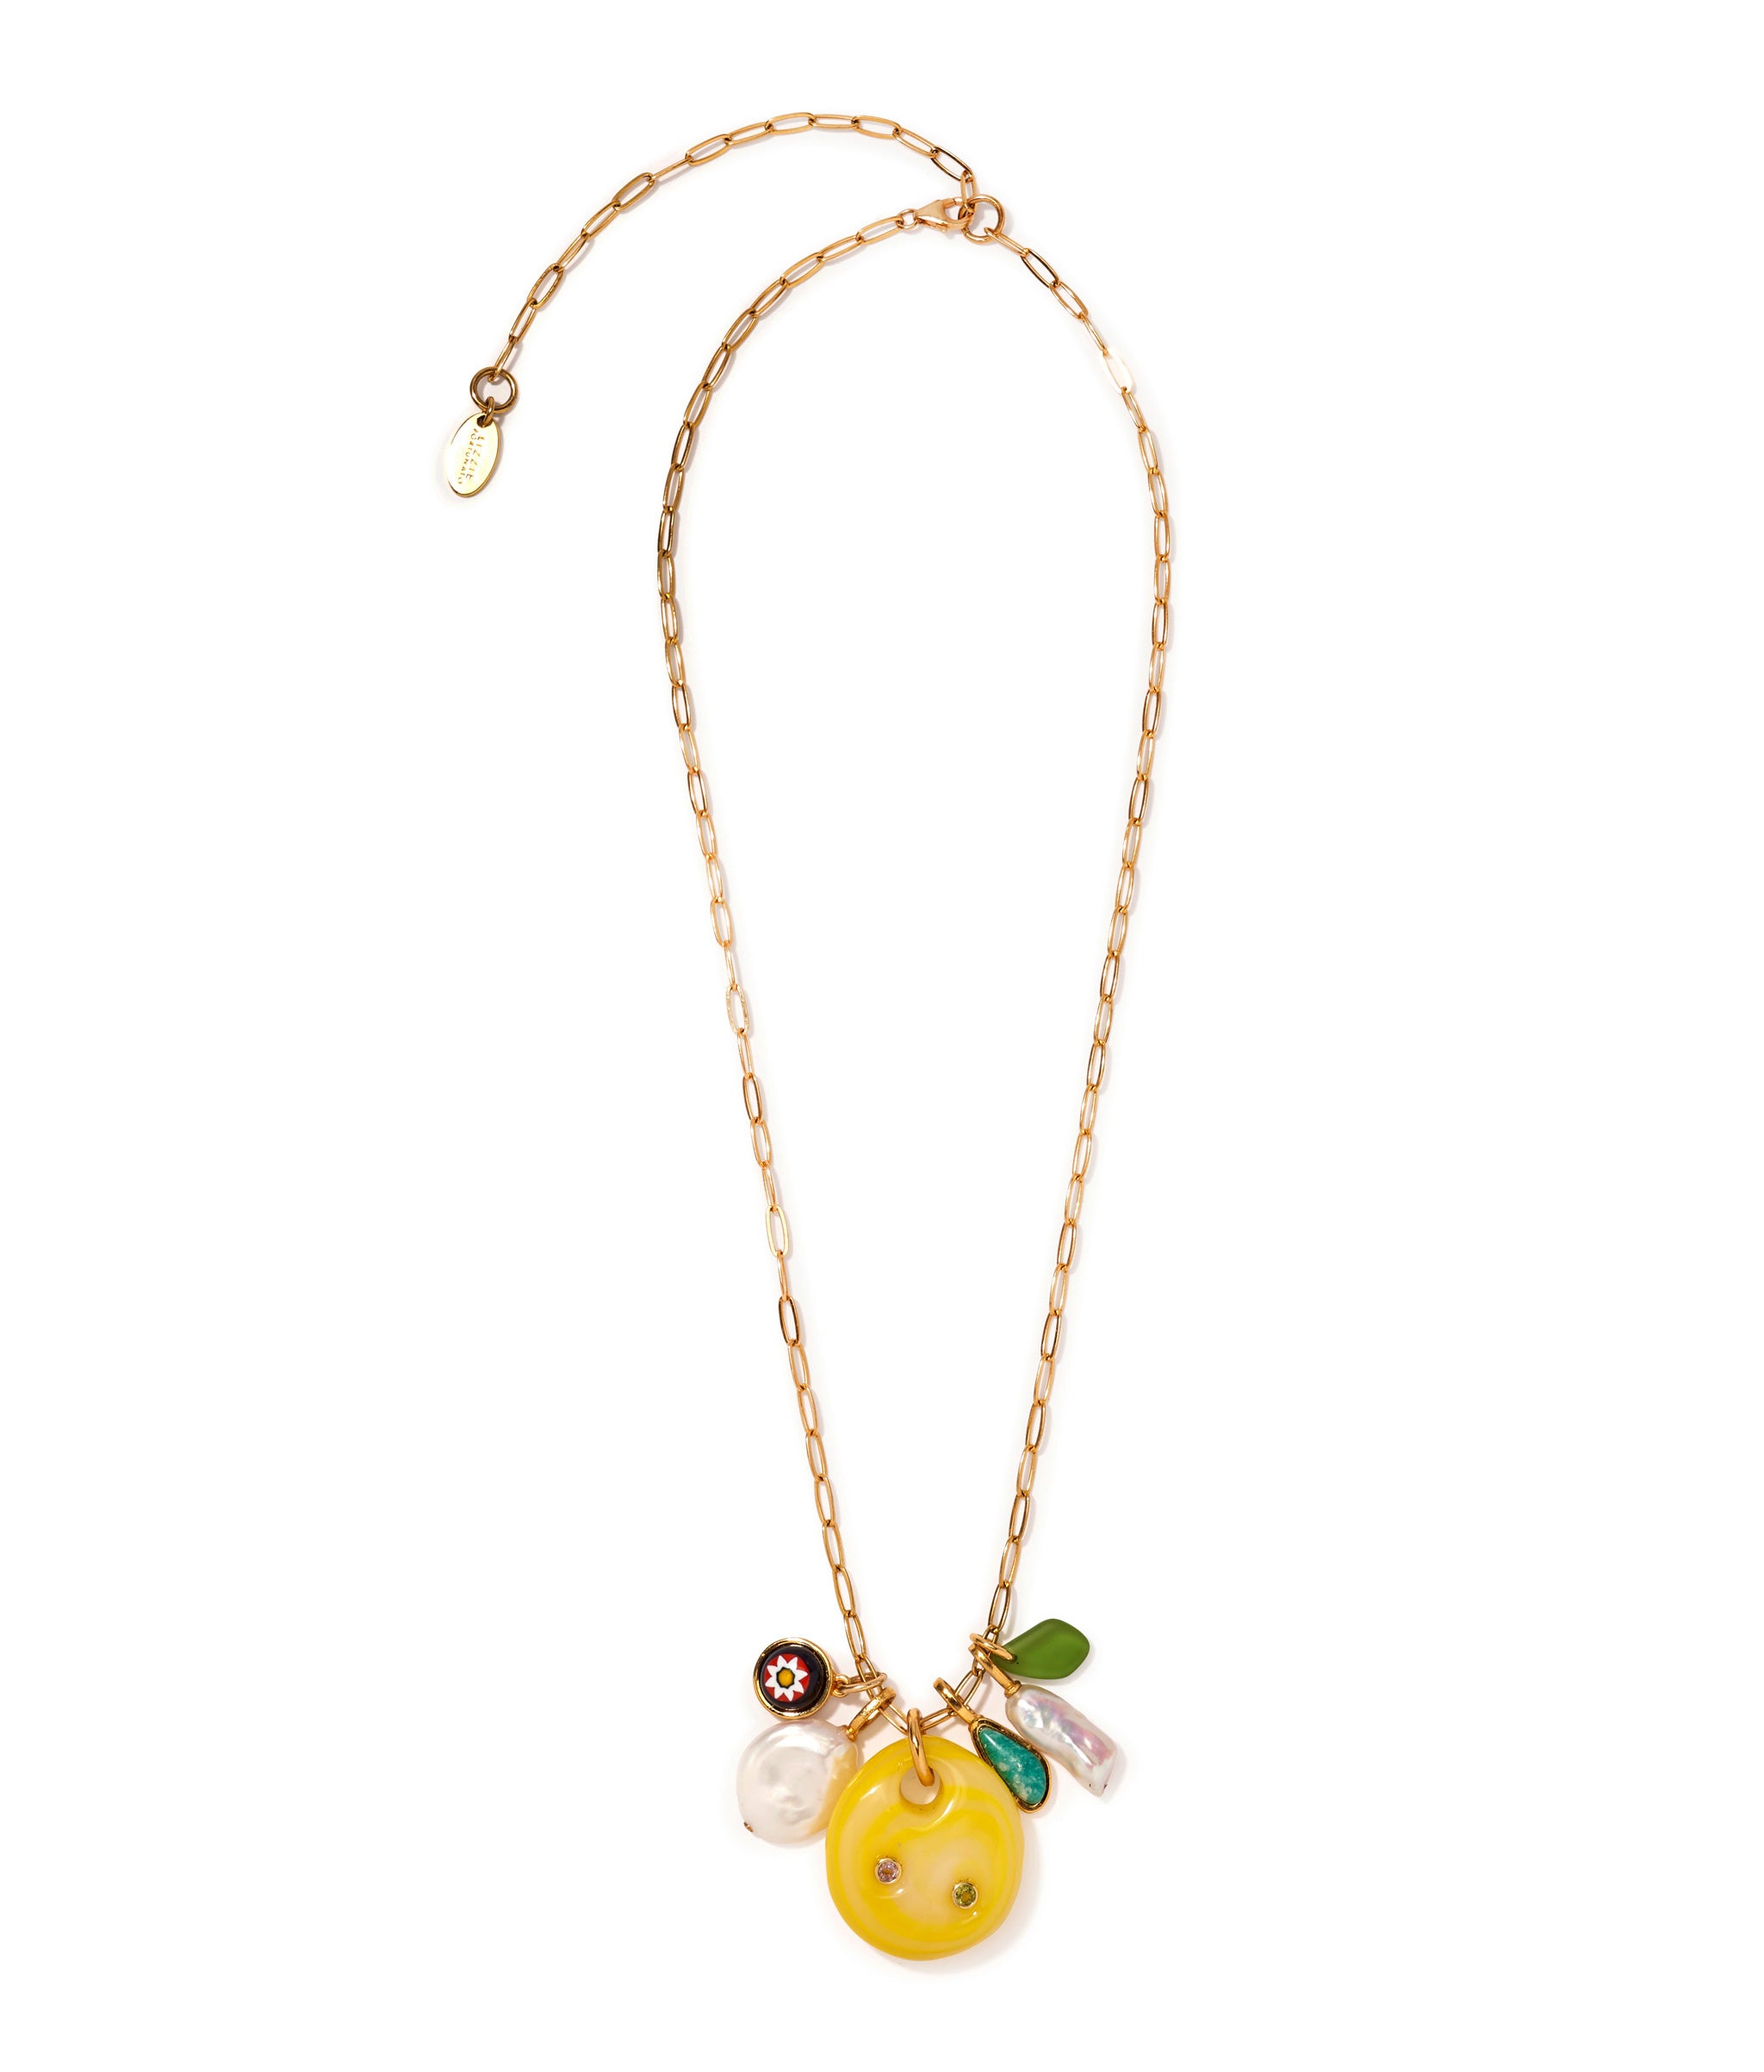 Rivas Charm Necklace. Gold chain necklace with millefiori, pearl, amazonite, sea glass charms and a yellow glass pendant